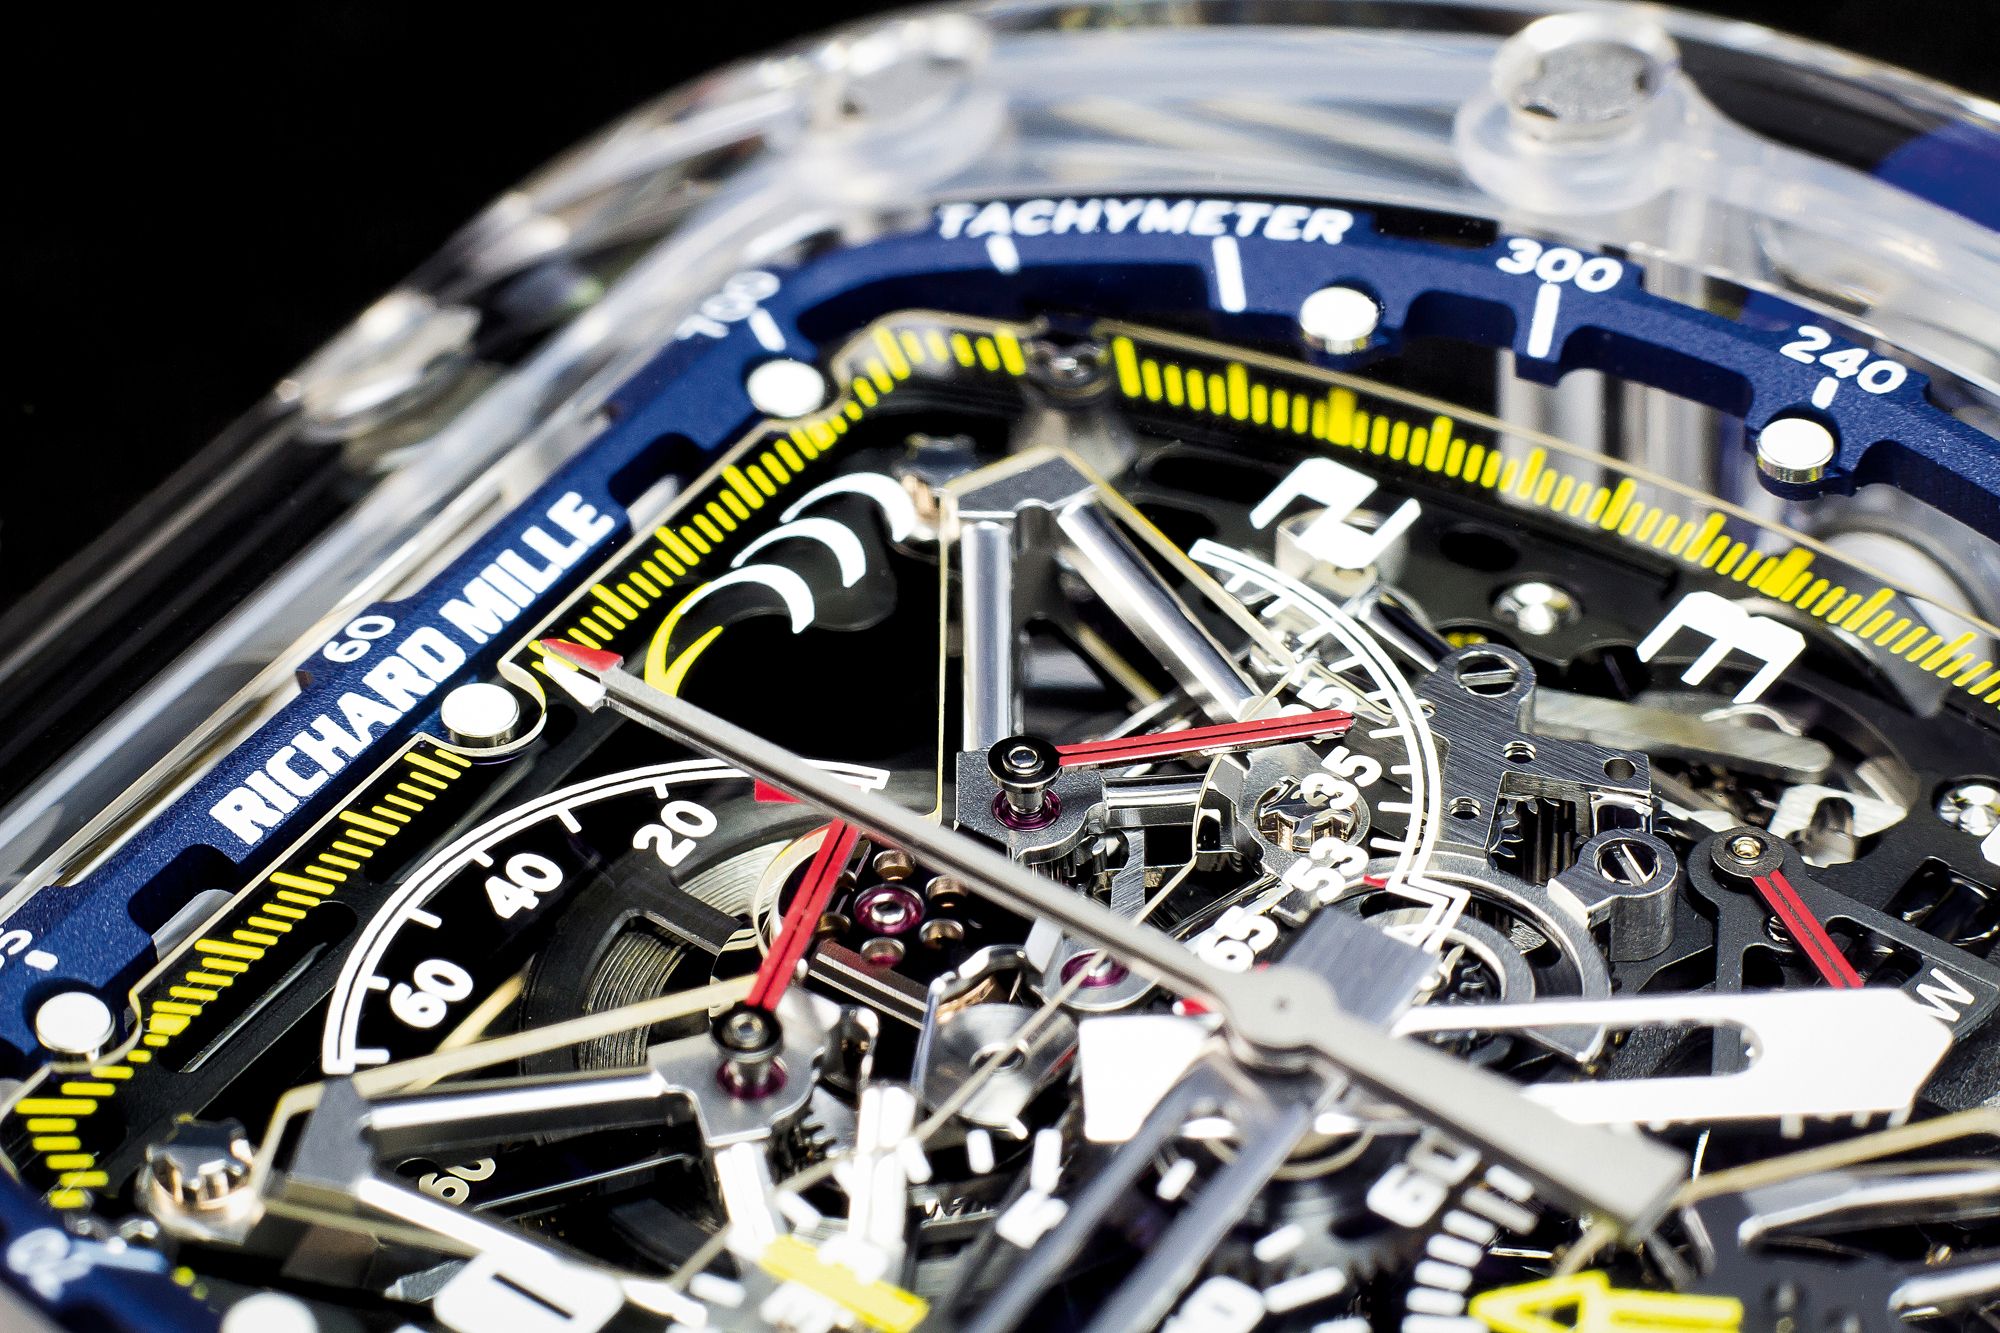 Richard Mille RM 11-05 Automatic Winding Flyback Chronograph GMT